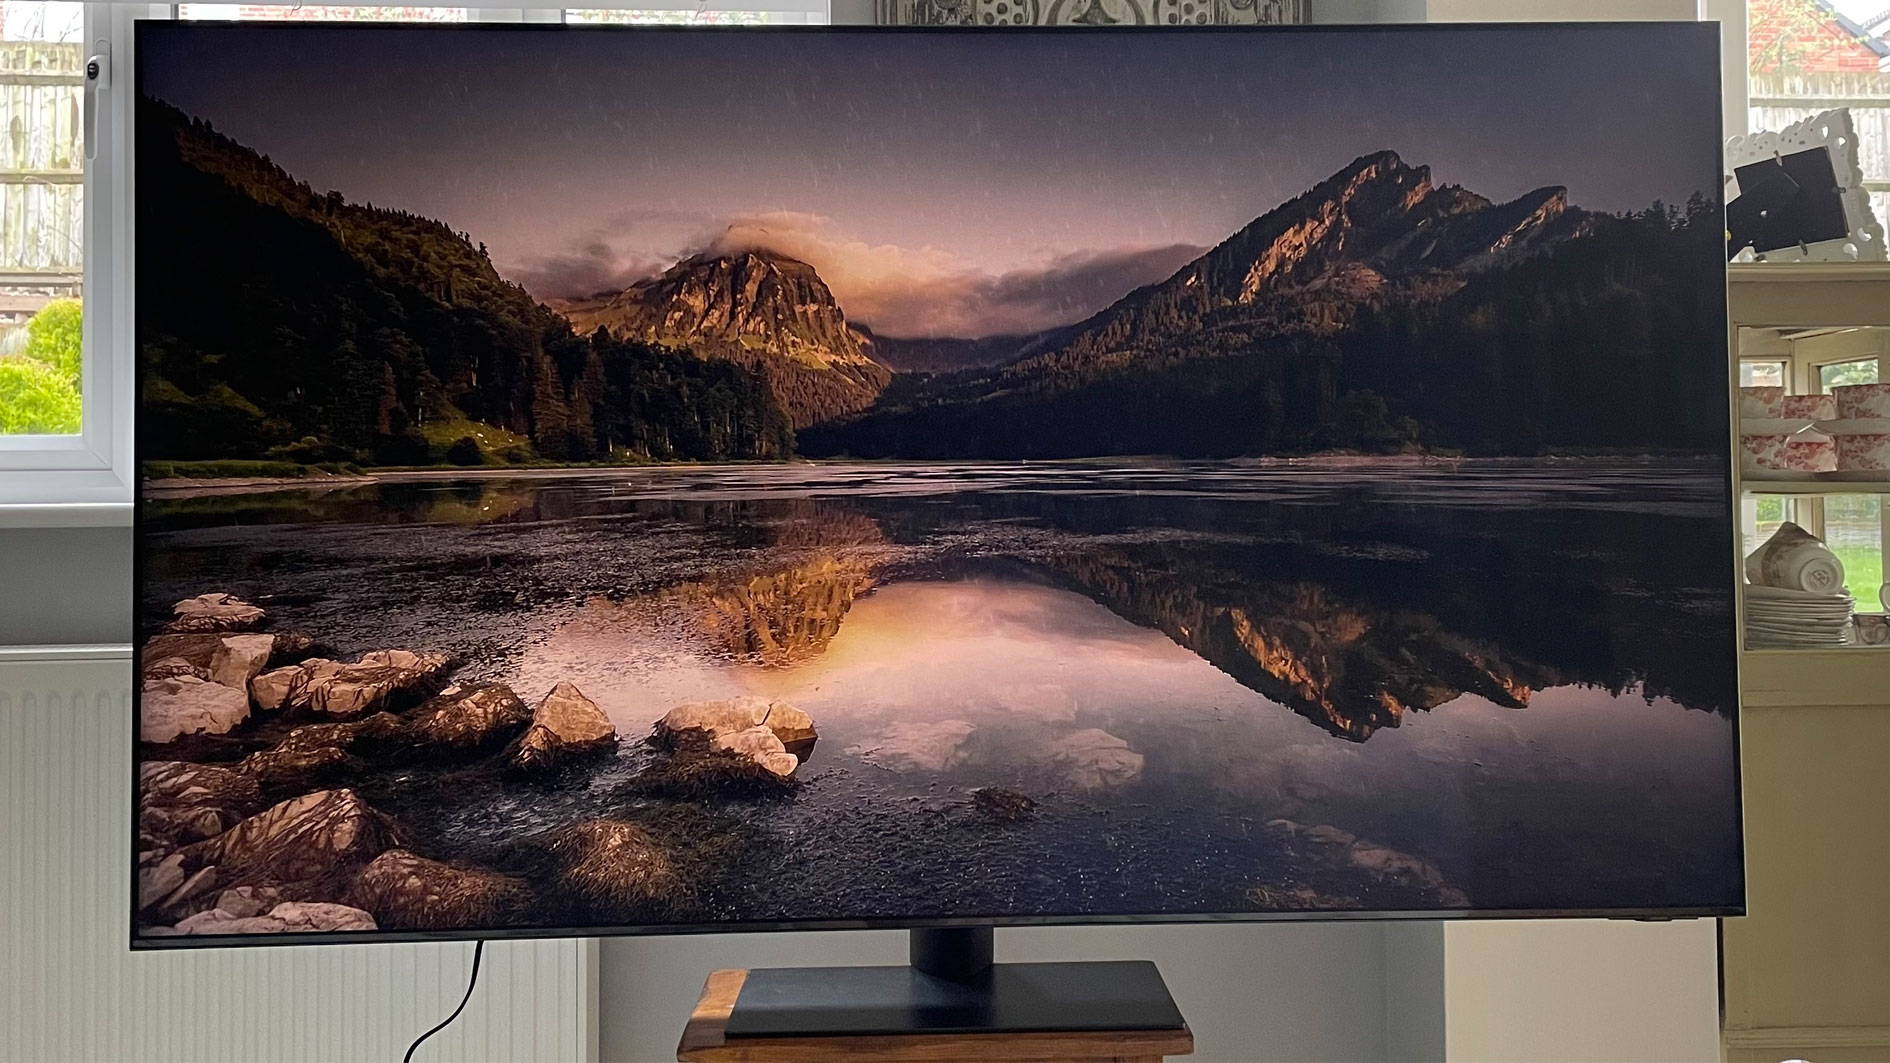 Samsung 85-inch 8K Neo QLED TV quick review: Premium TV for pro users -  India Today